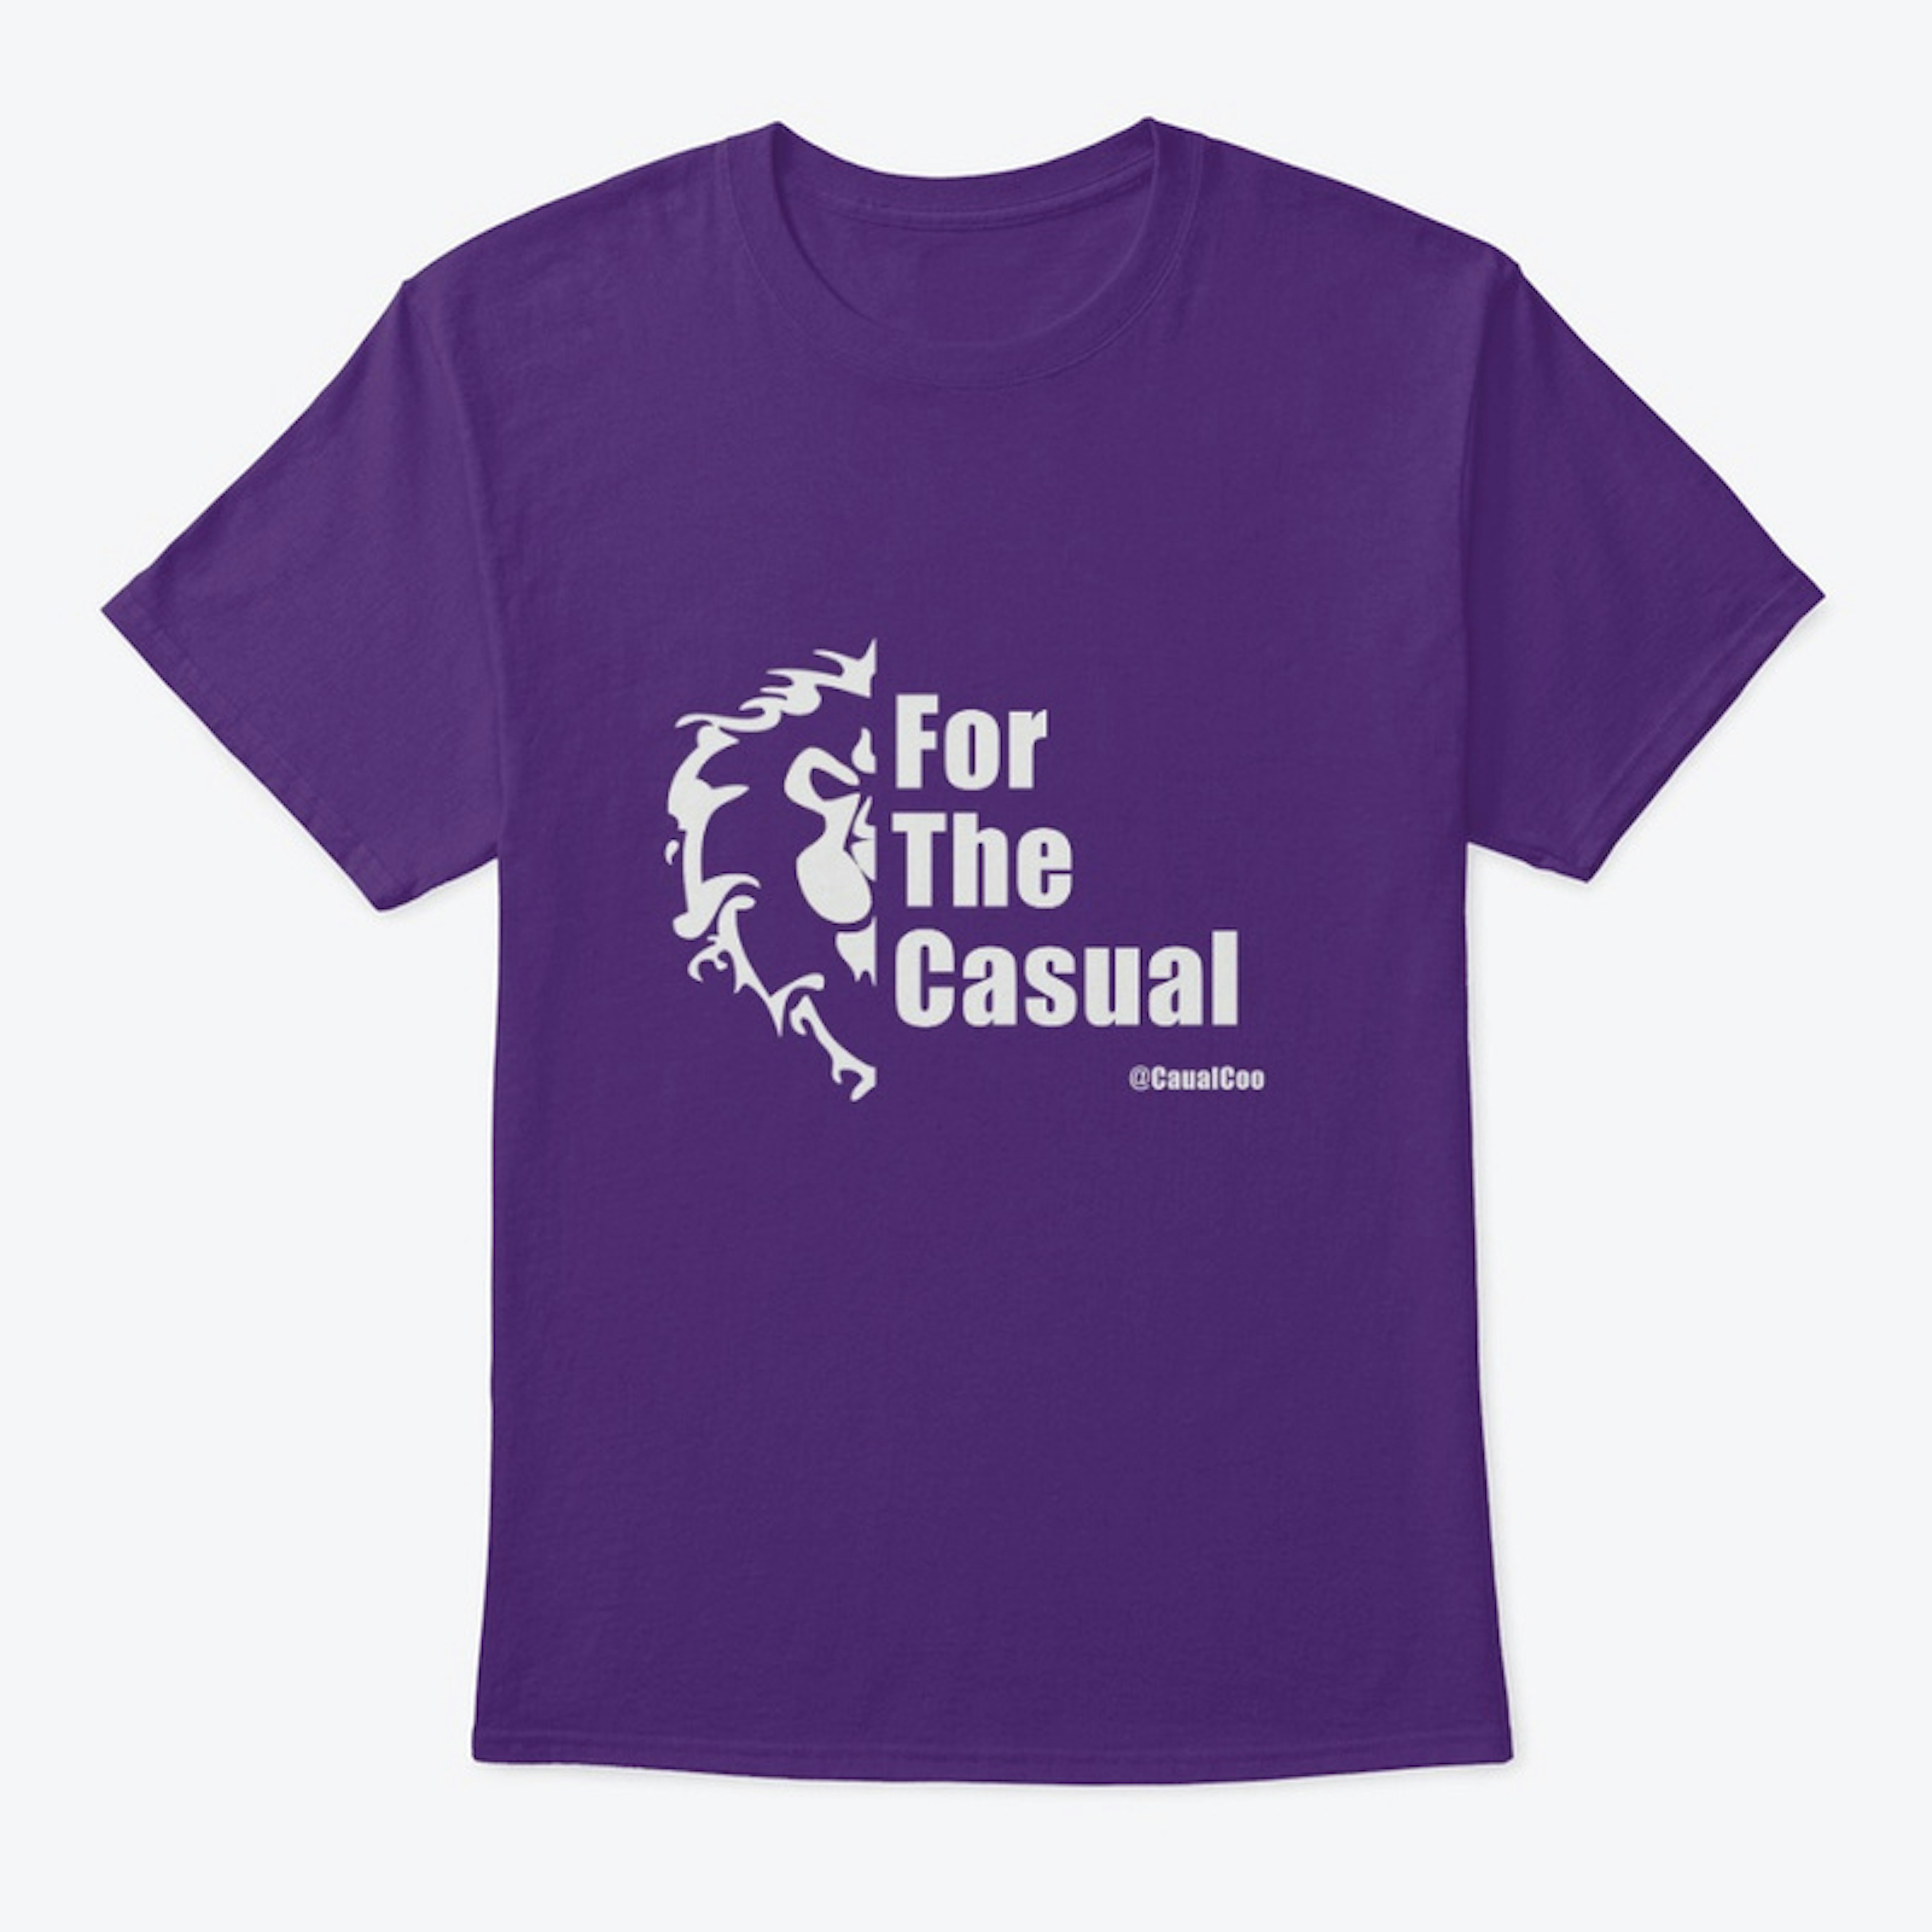 #ForTheCasual - Alliance